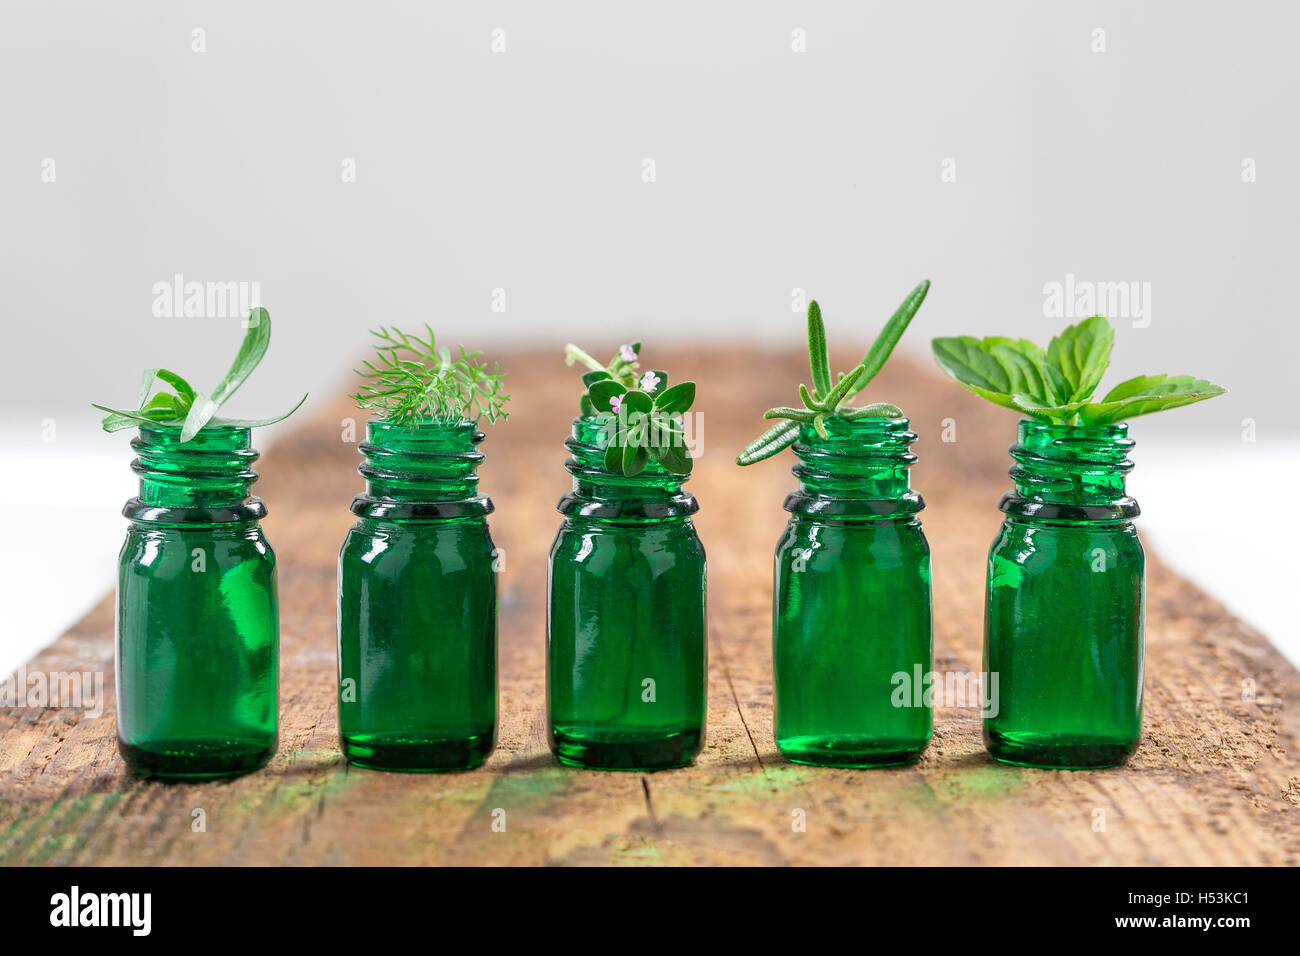 Green Bottle of essential oil with Fresh herbs and medicinal plants Stock Photo